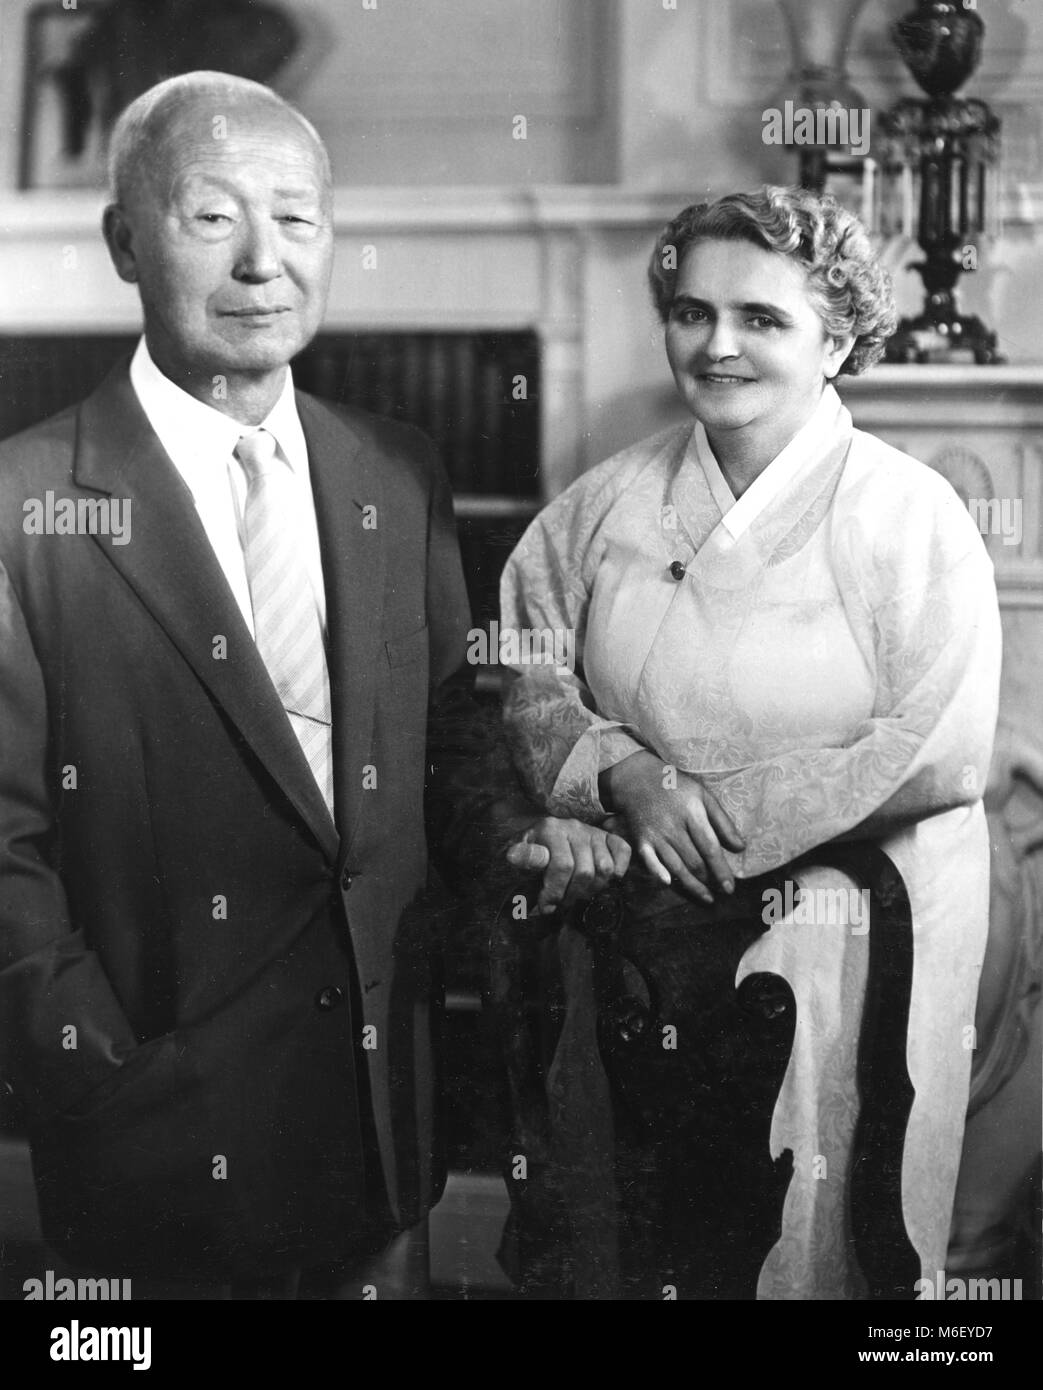 Syngman Rhee, the President of Korea, and his wife, Franziska Donner, pose at Blair House during their visit to the United States, Washington, DC, 08/03/1954. Stock Photo